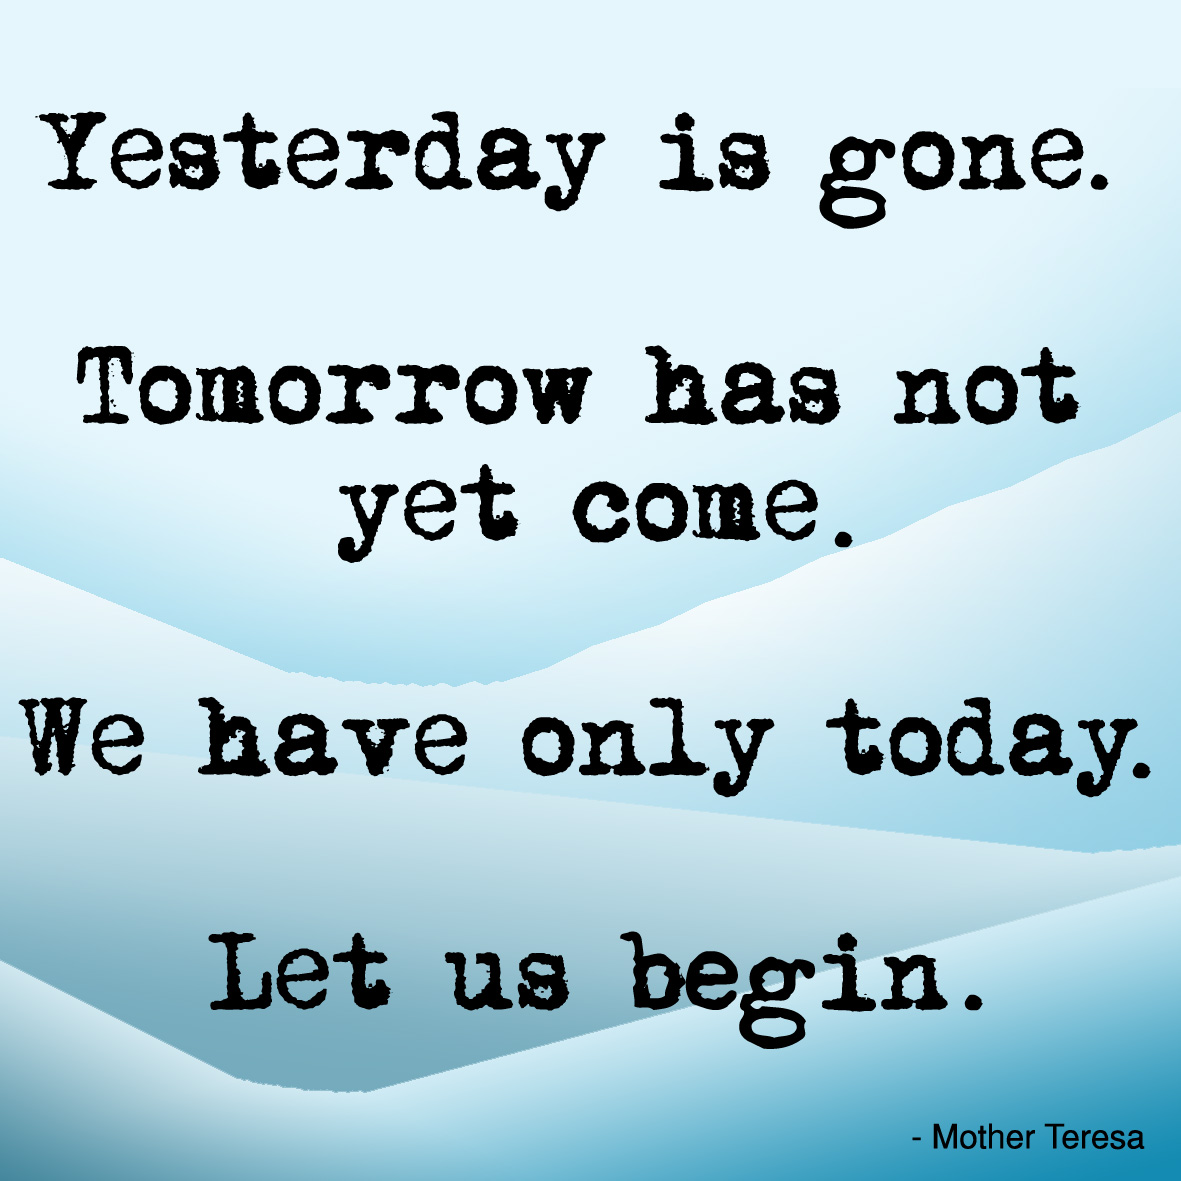 Yesterday is gone tomorrow. Not yet. Let us begin. Are we coming yet.